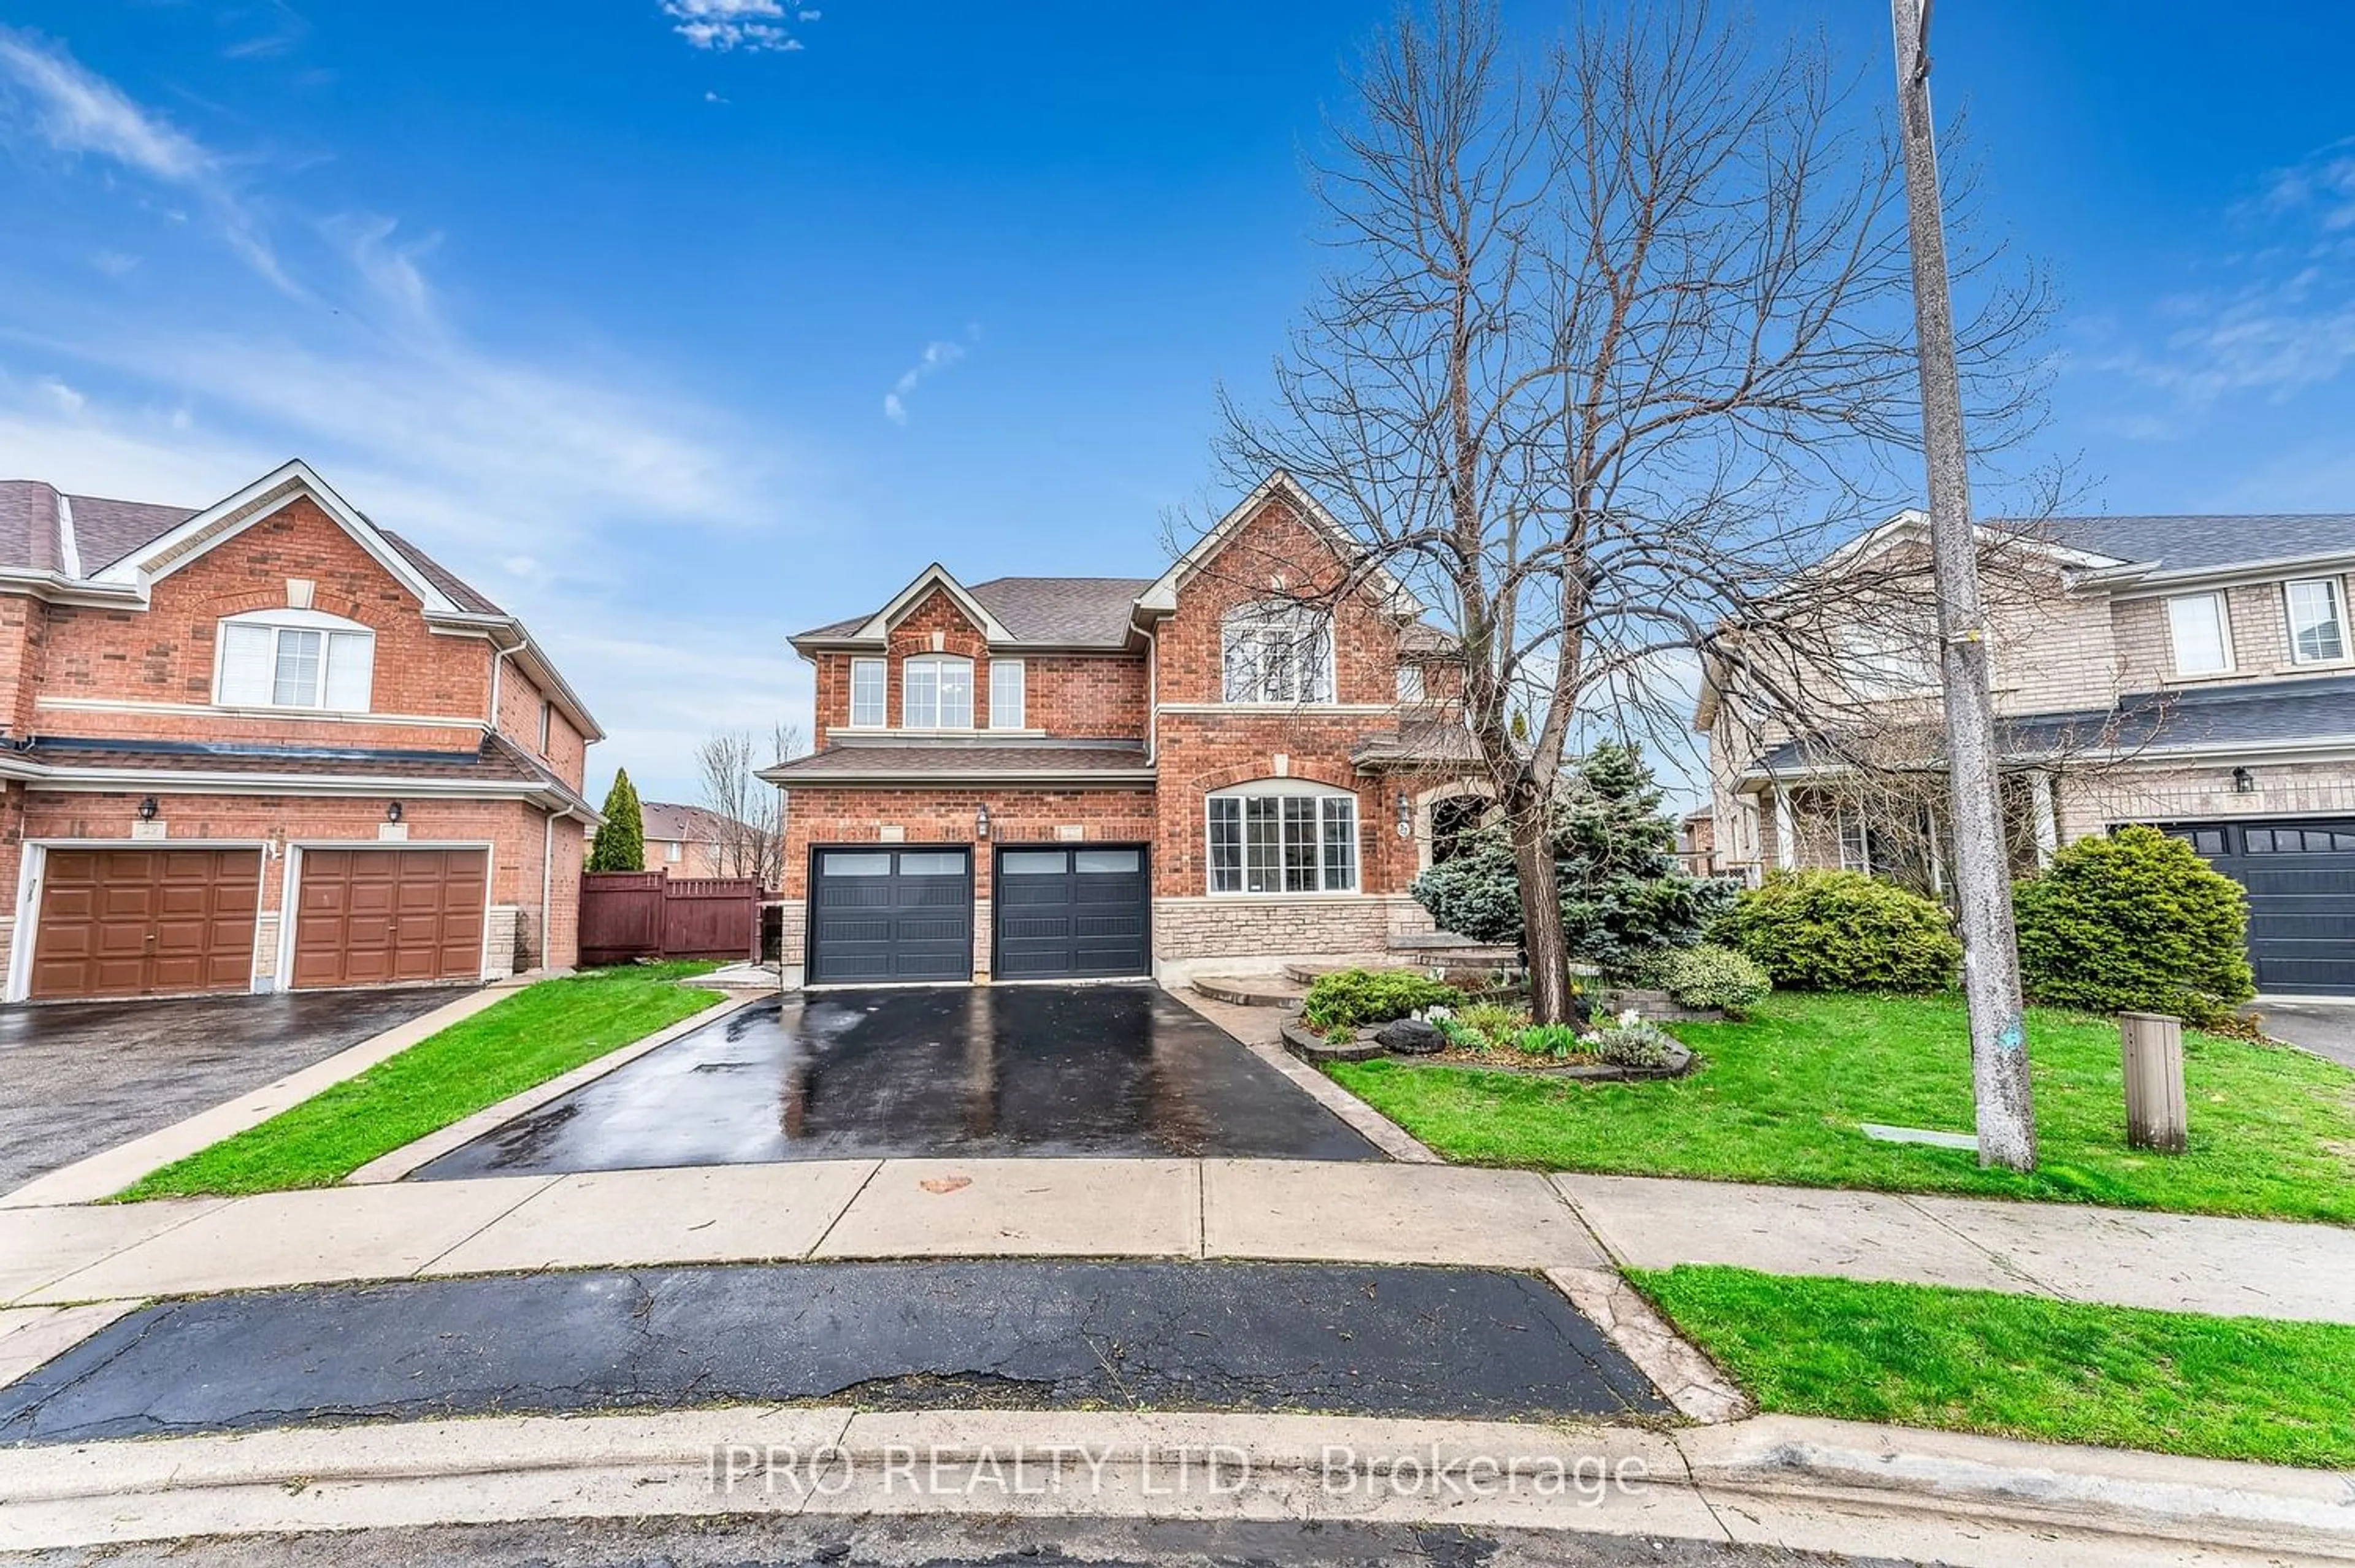 Home with brick exterior material for 27 Linderwood Dr, Brampton Ontario L7A 1S3